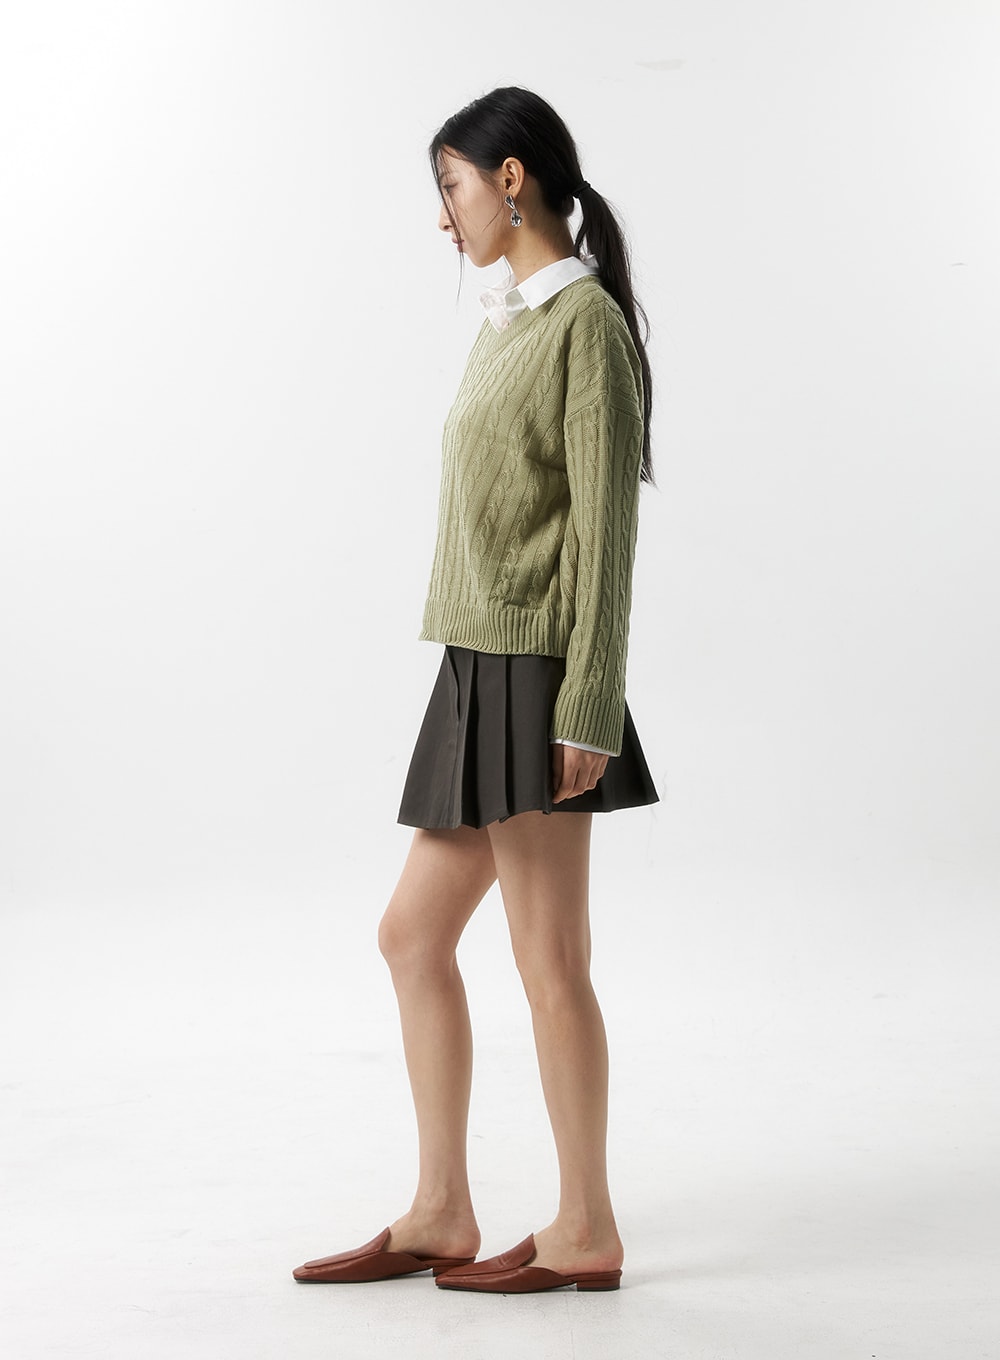 v-neck-cable-knit-sweater-is315